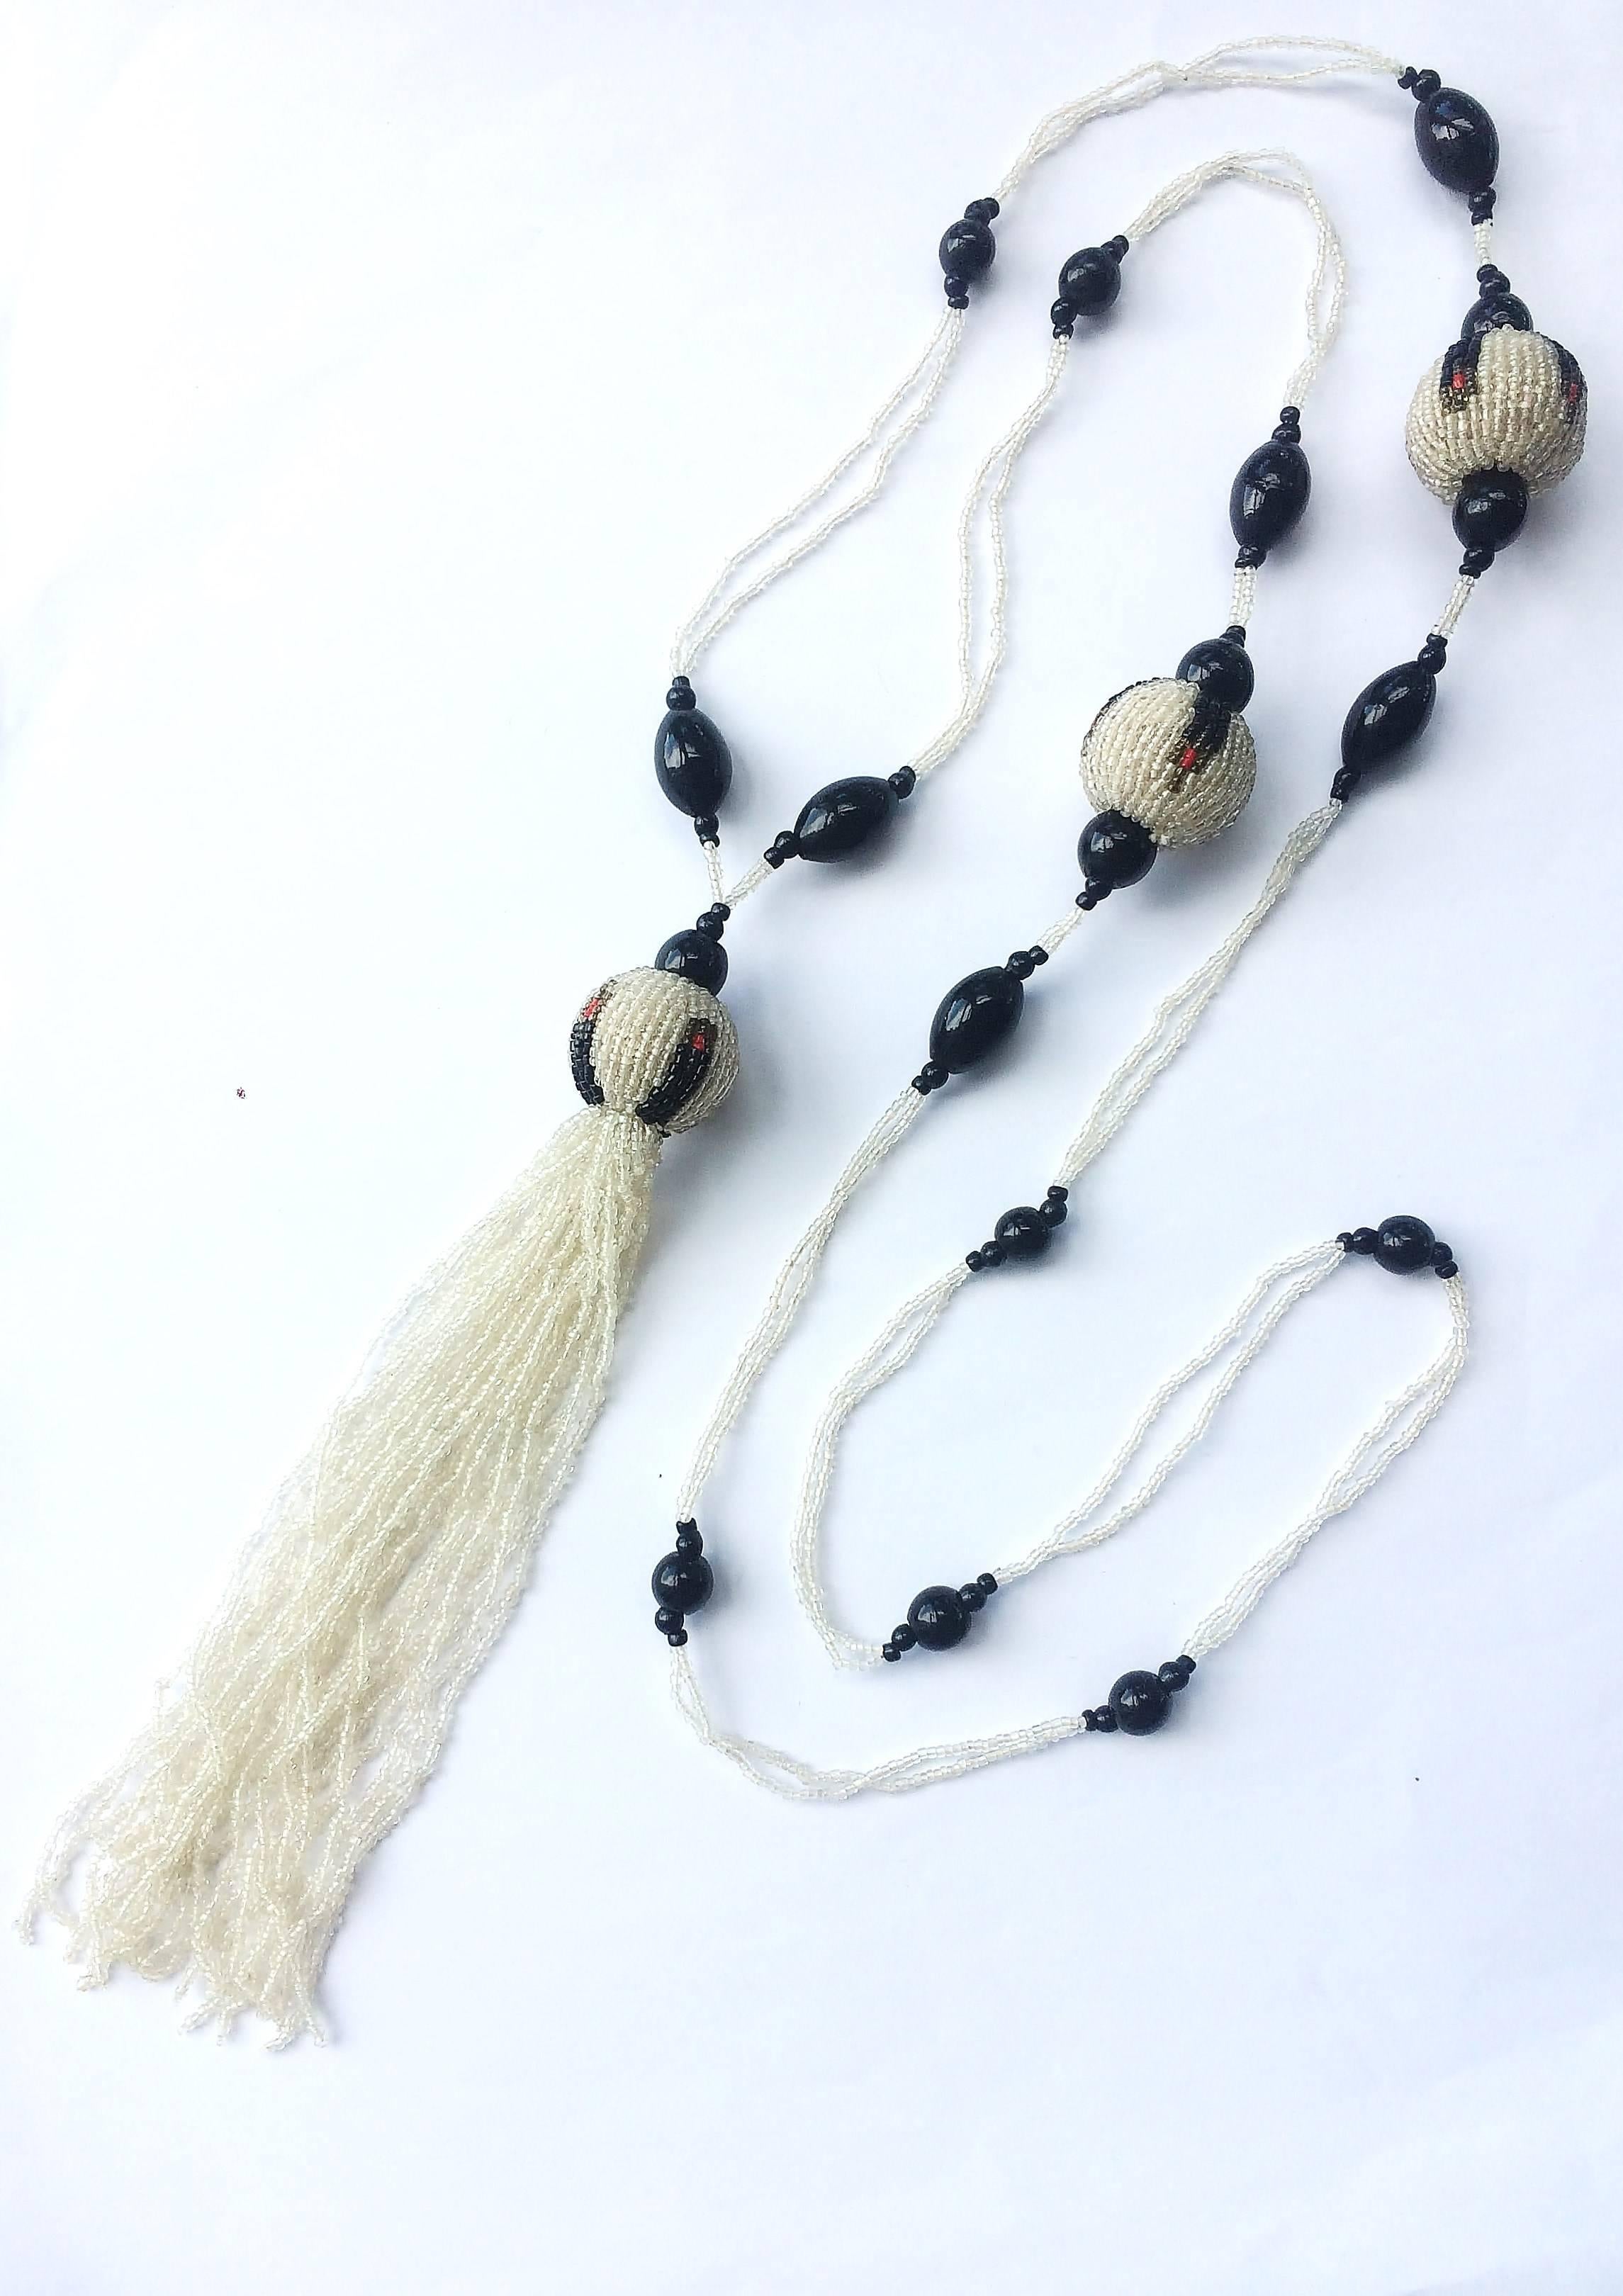 An exceptional and very very long off white, black, citrine and red beaded sautoir necklace, from the 1910s/20s, highly typical of the fashions through that time. Light and elegant, the necklace is a mixture of microbeads, and larger round and oval